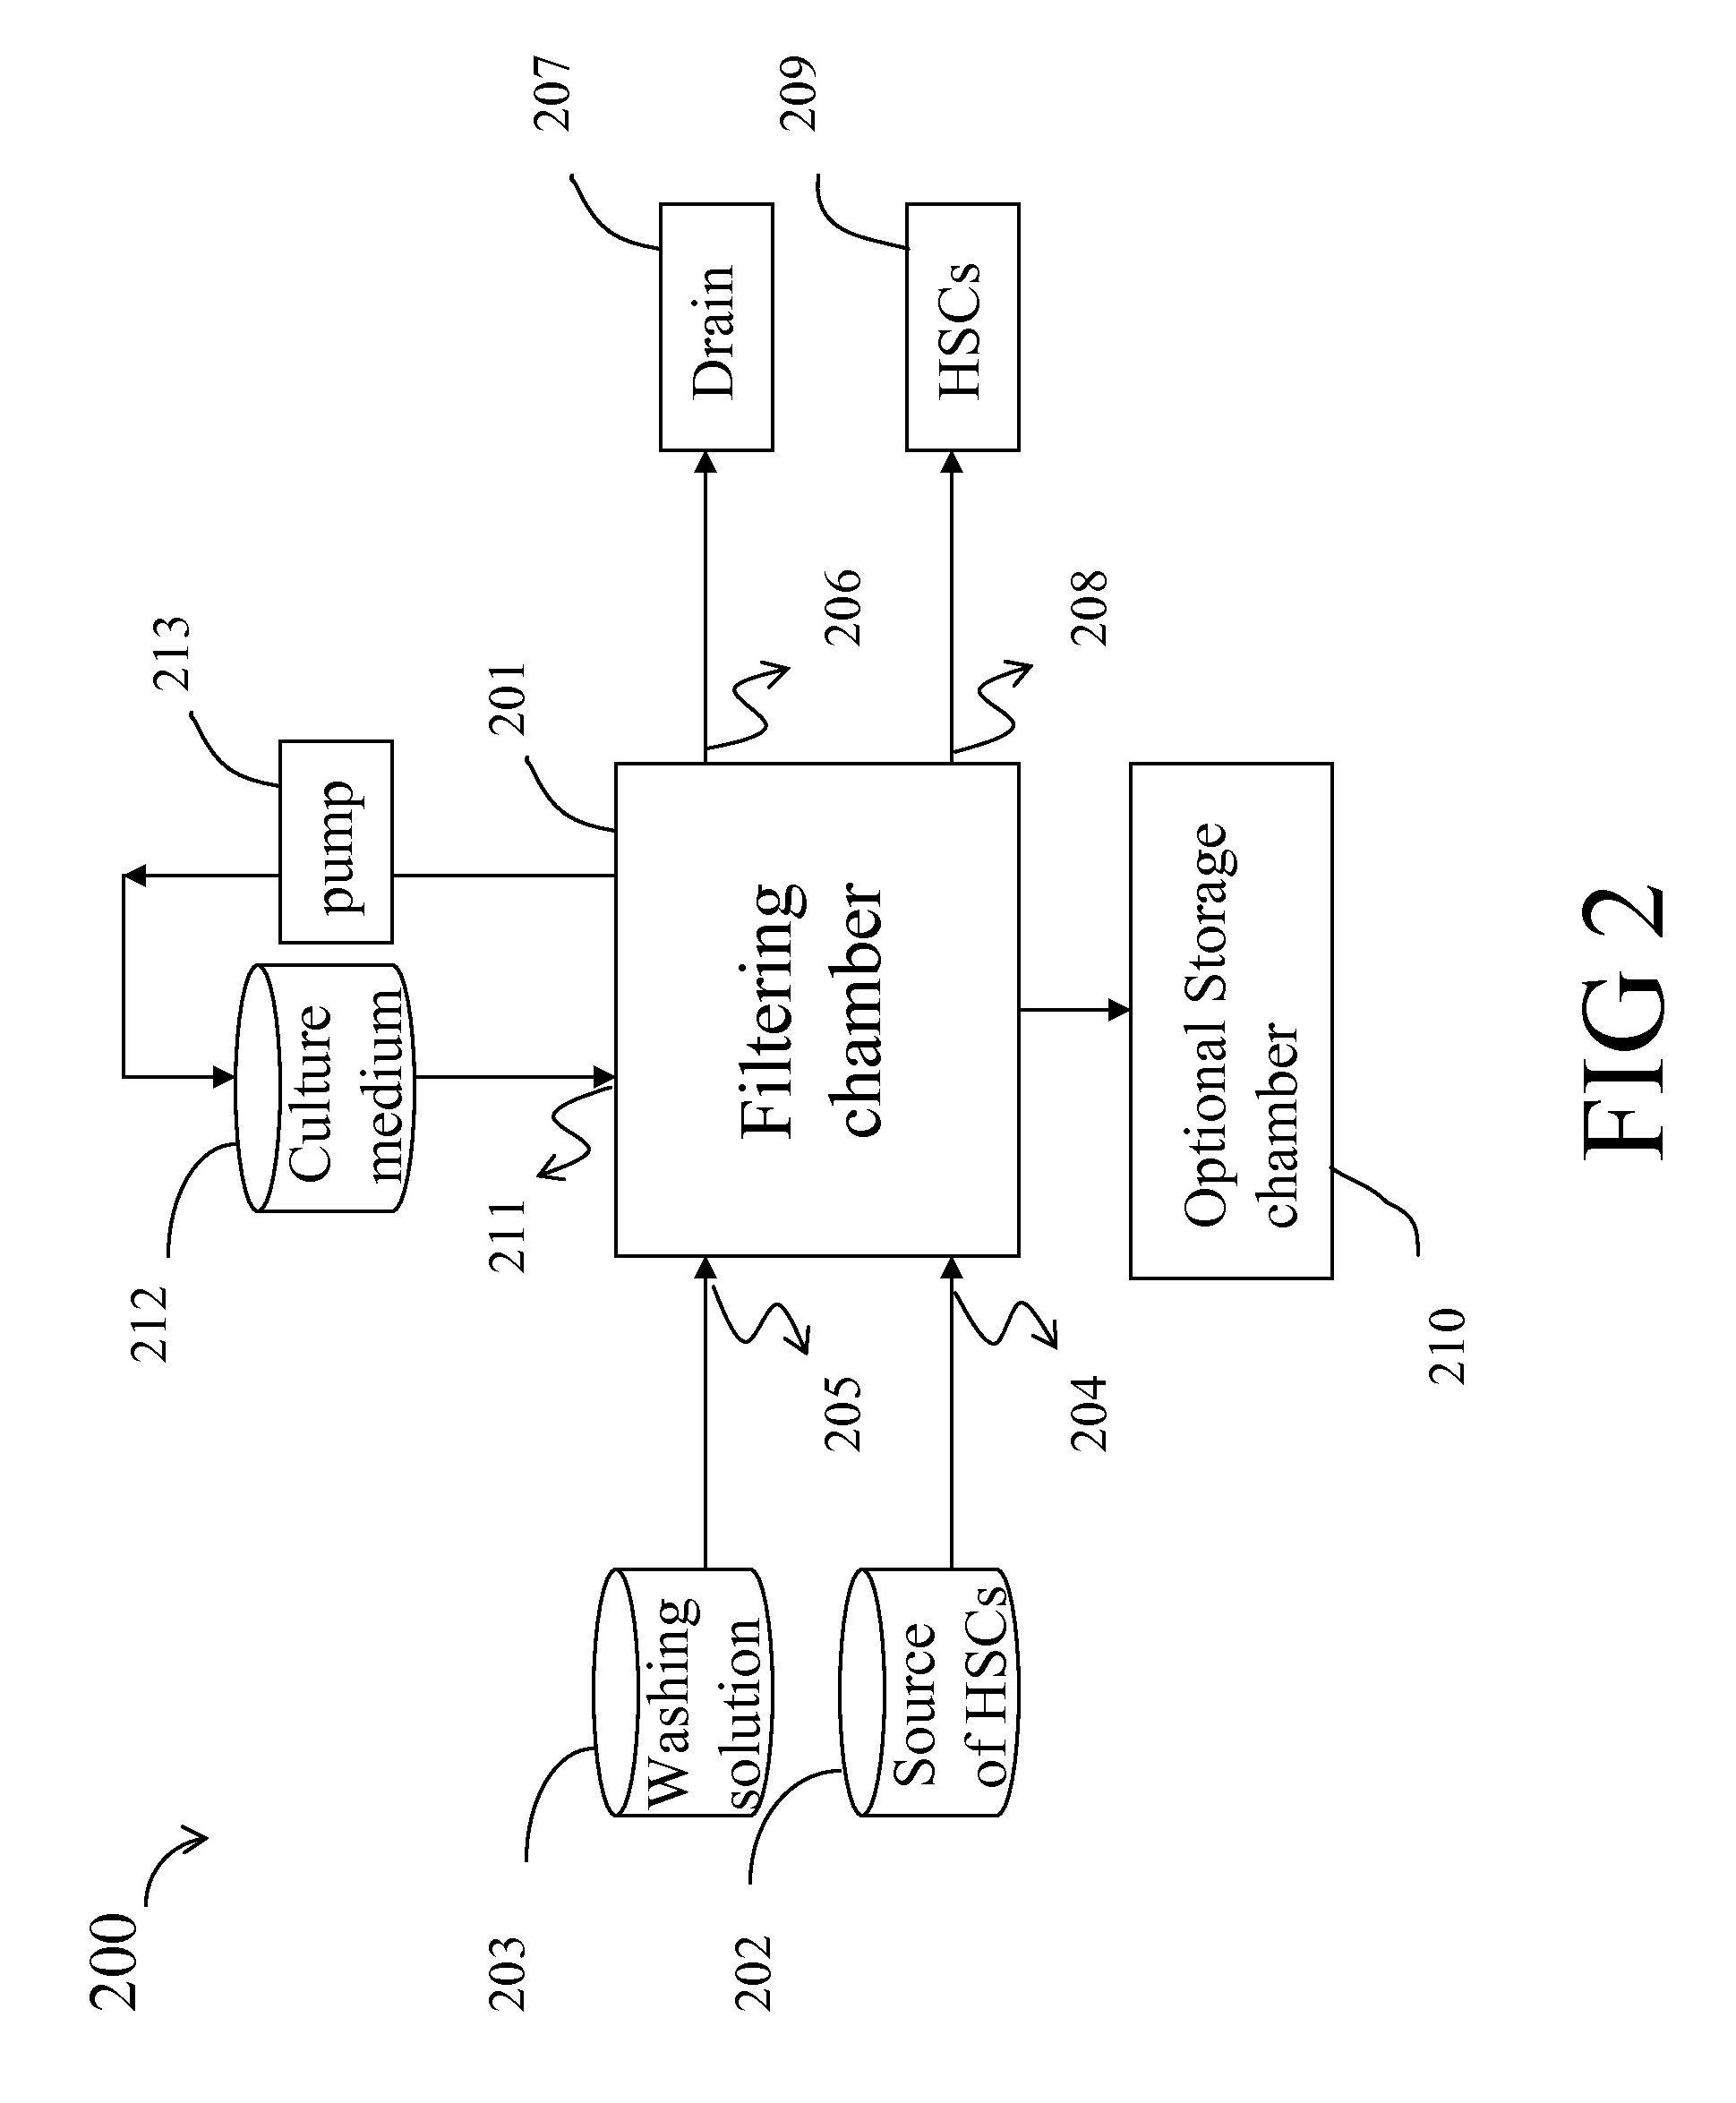 Methods and Systems for Isolating, Ex Vivo Expanding and Harvesting Hematopoietic Stem Cells